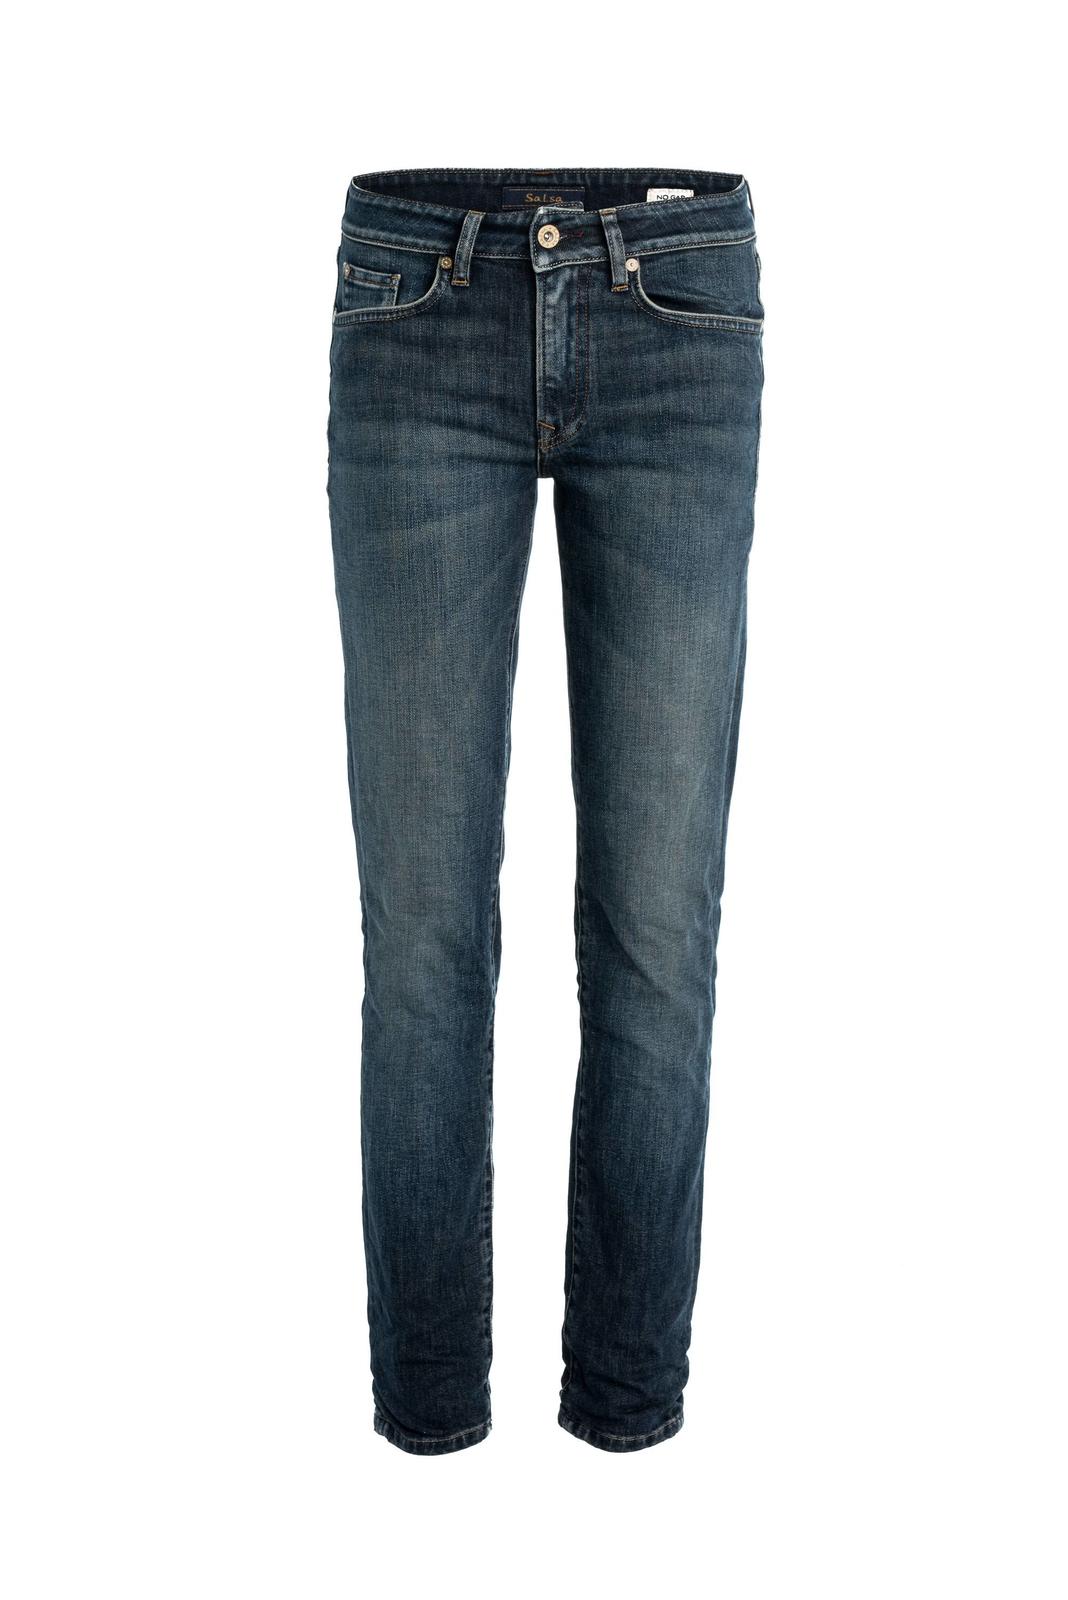 jeans slimming it escuros, Salsa €79,95_5